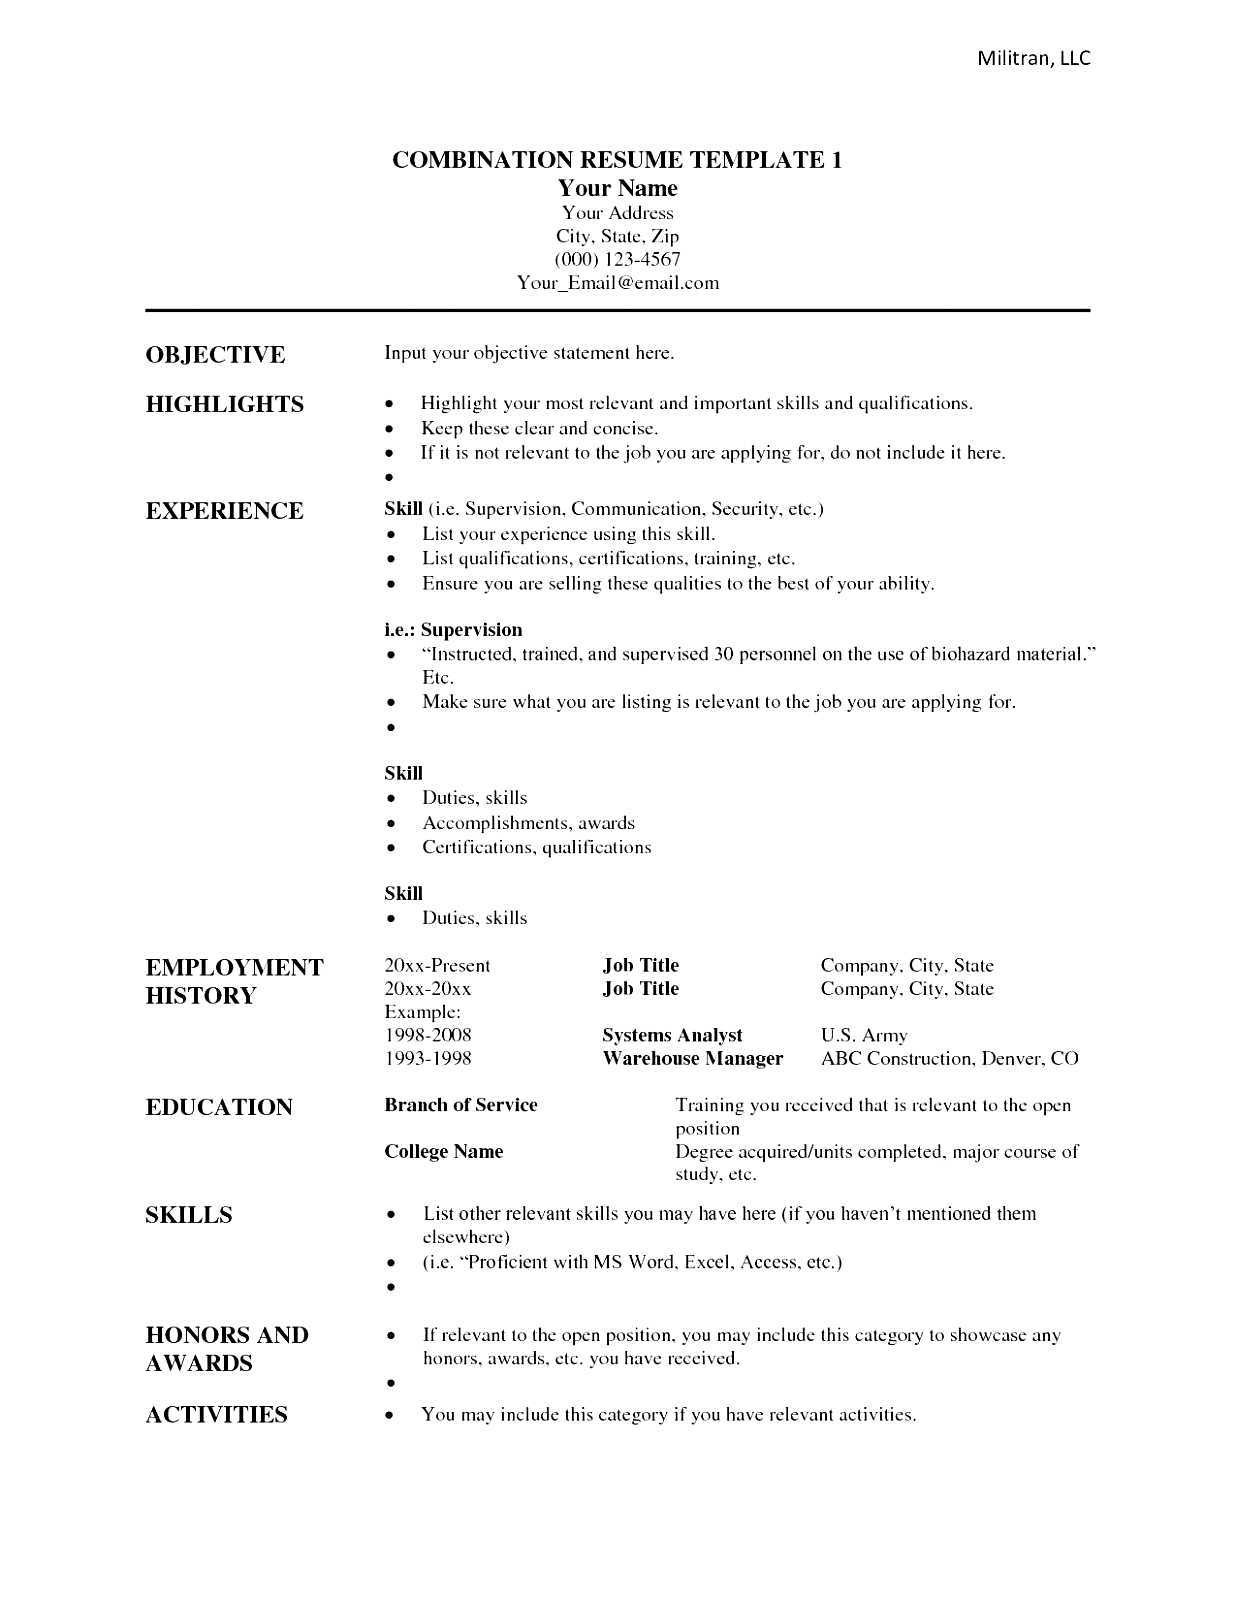 Functional Resume Template Google Docs Cv Mila Friedman Within Combination Resume Template Word